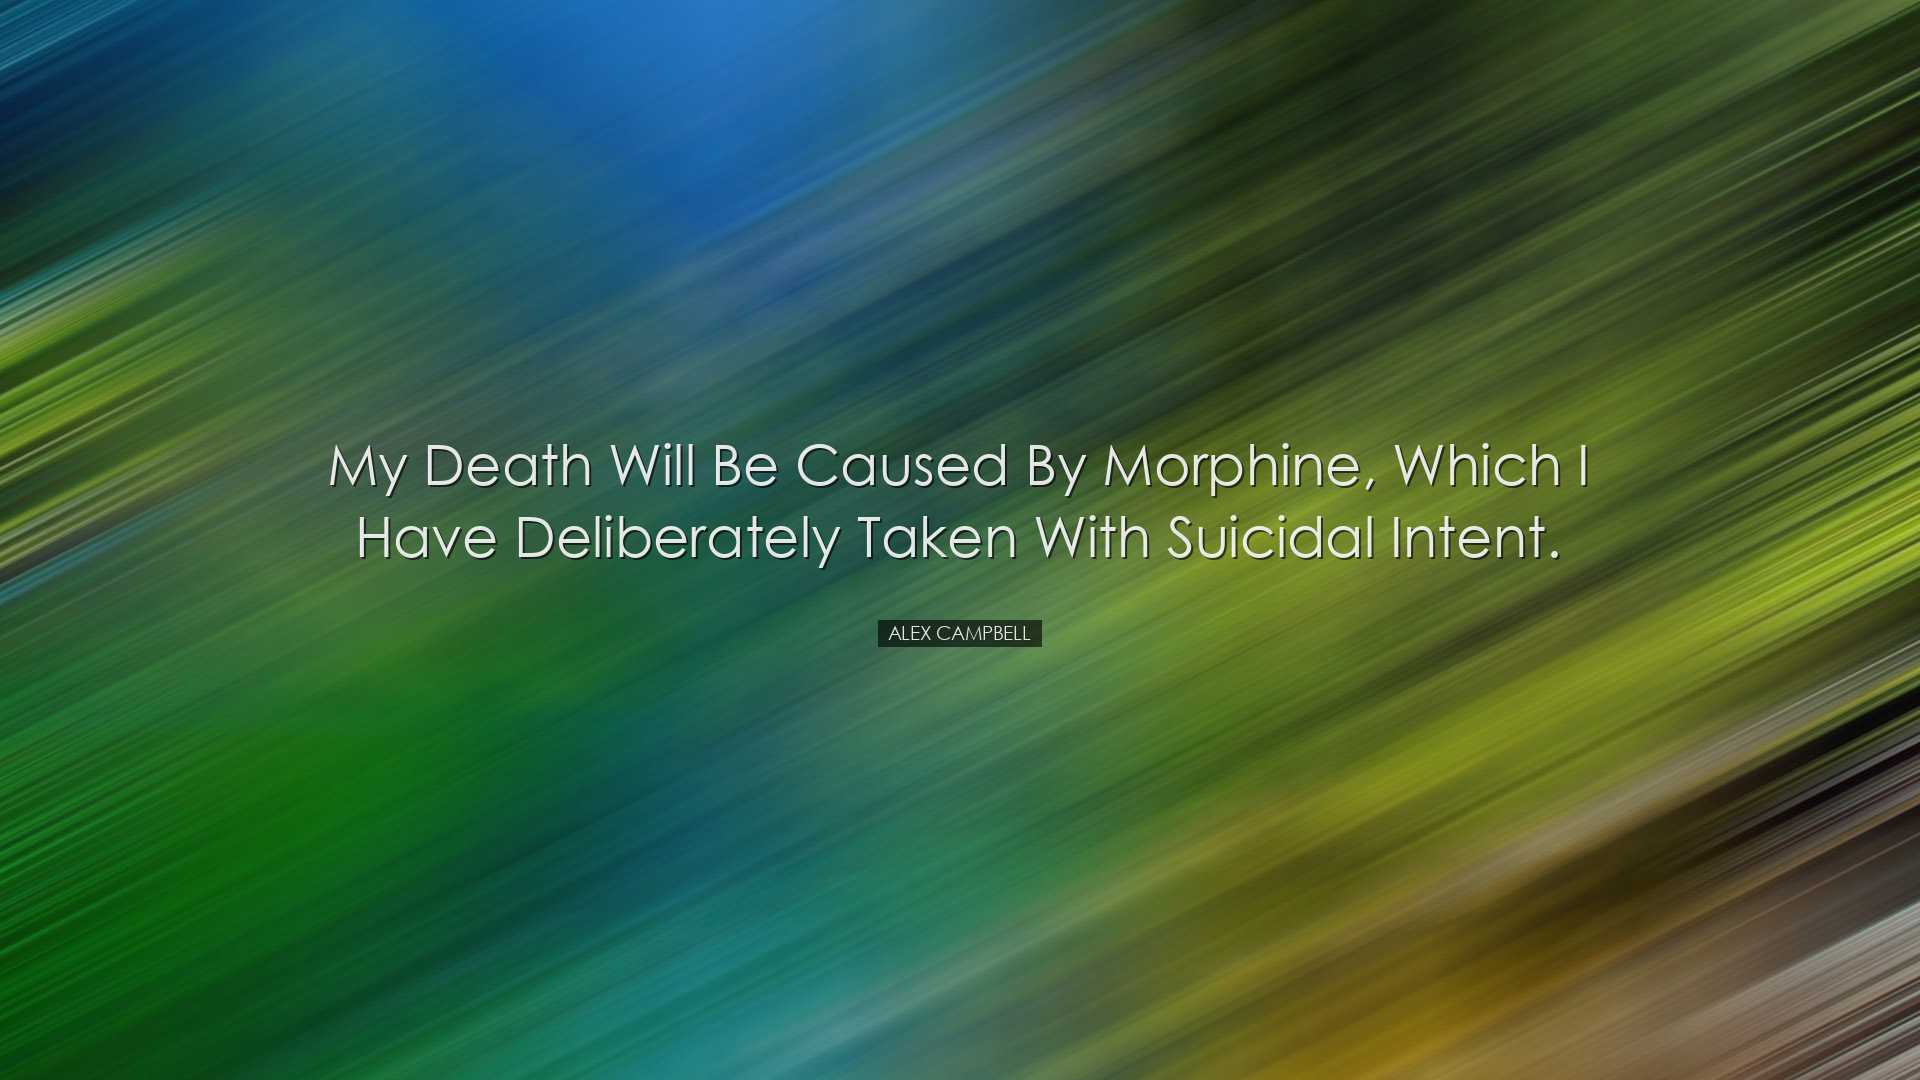 My death will be caused by morphine, which I have deliberately tak